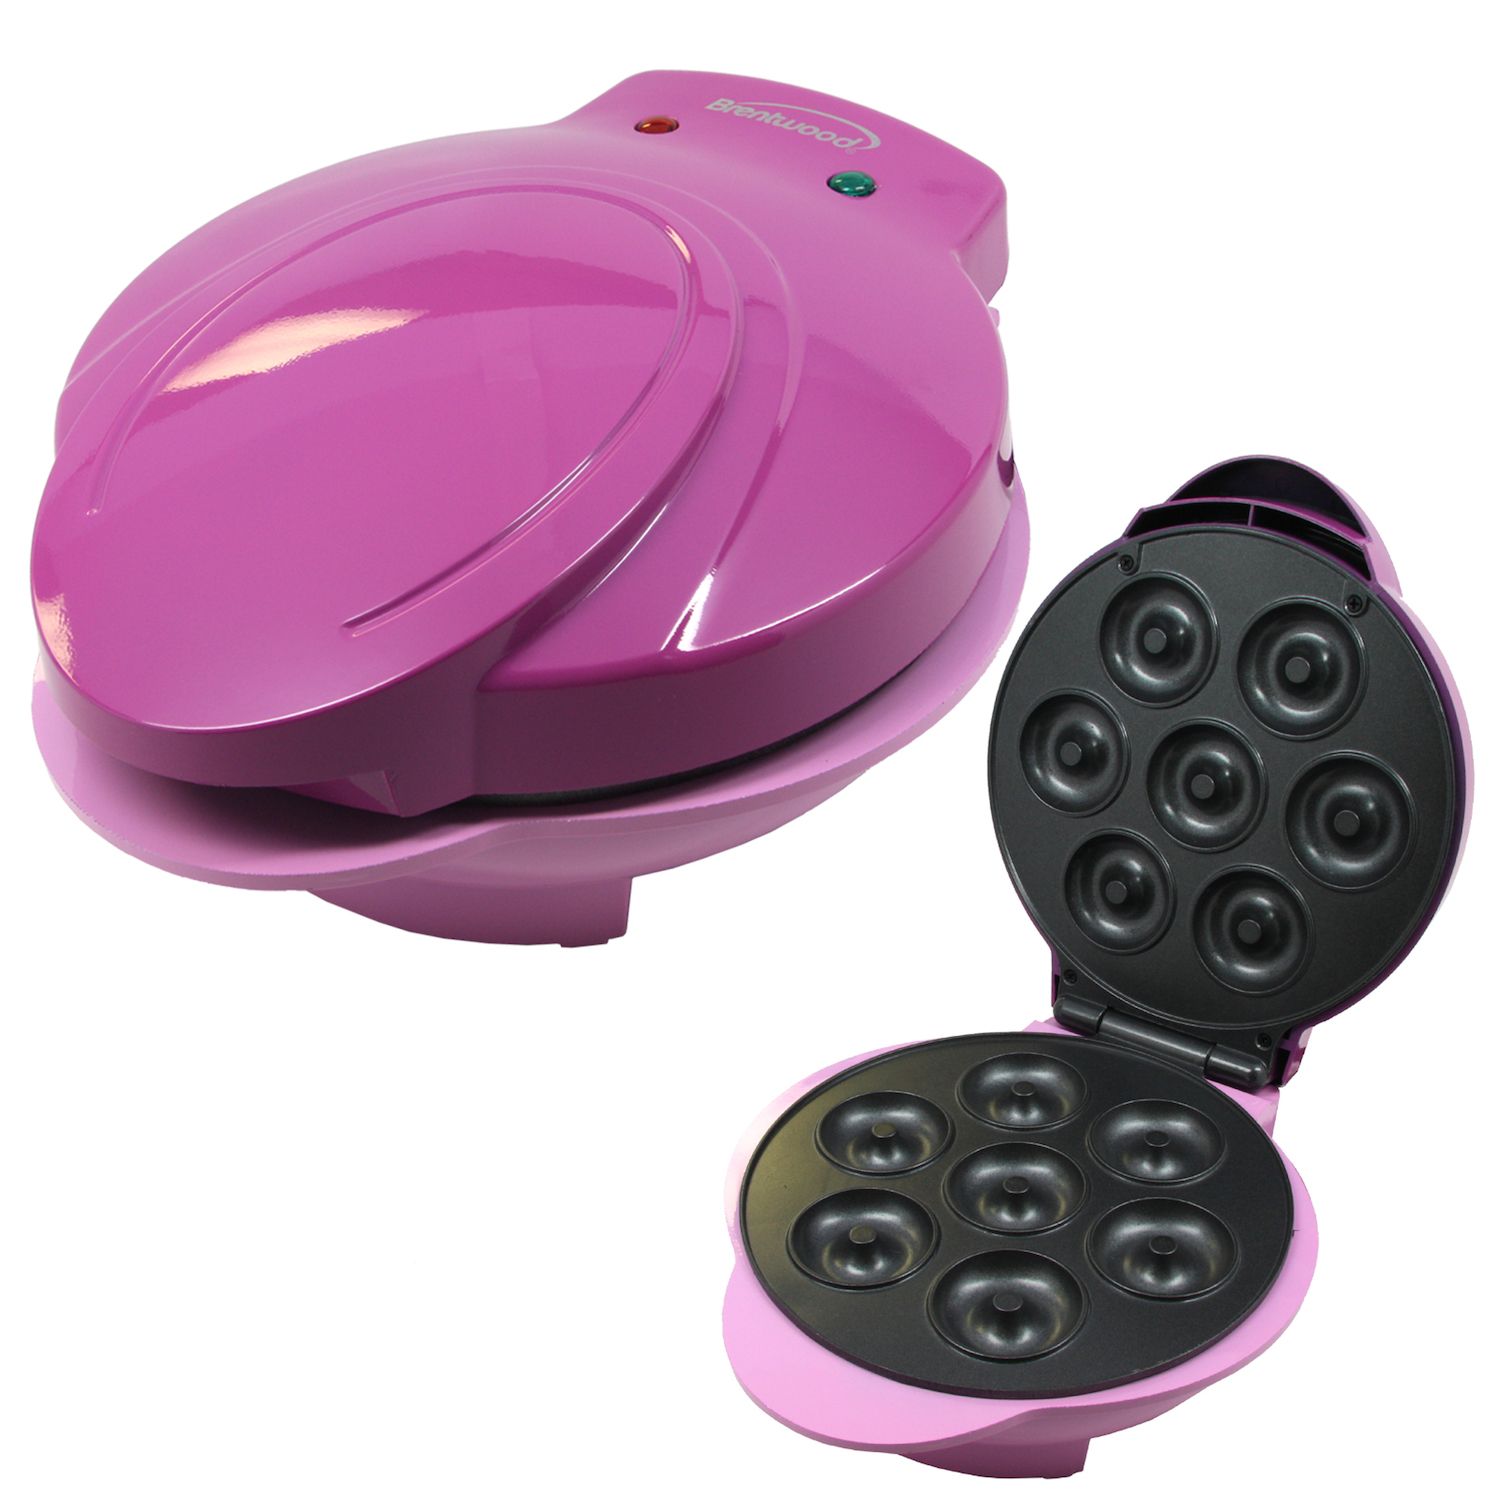 These DASH Mini Waffle Makers Are as Low as $10 Right Now – SheKnows